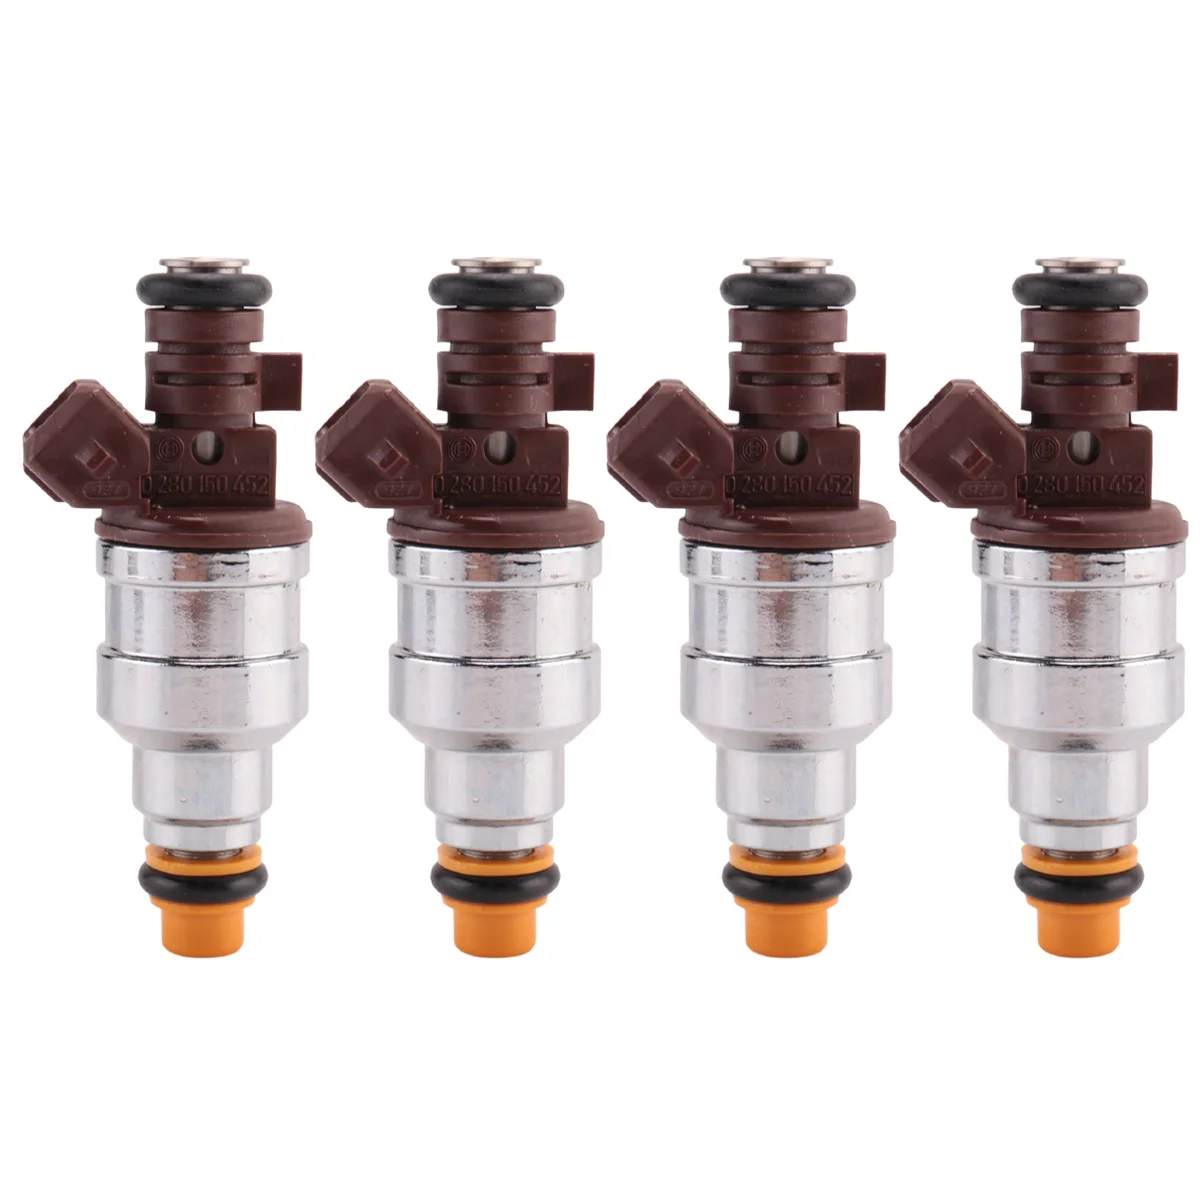 

4Pcs 0280150452 Car Styling Injector Fuel Engine Injection Nozzle for Opel Vectra CD 2.0 16V 1995